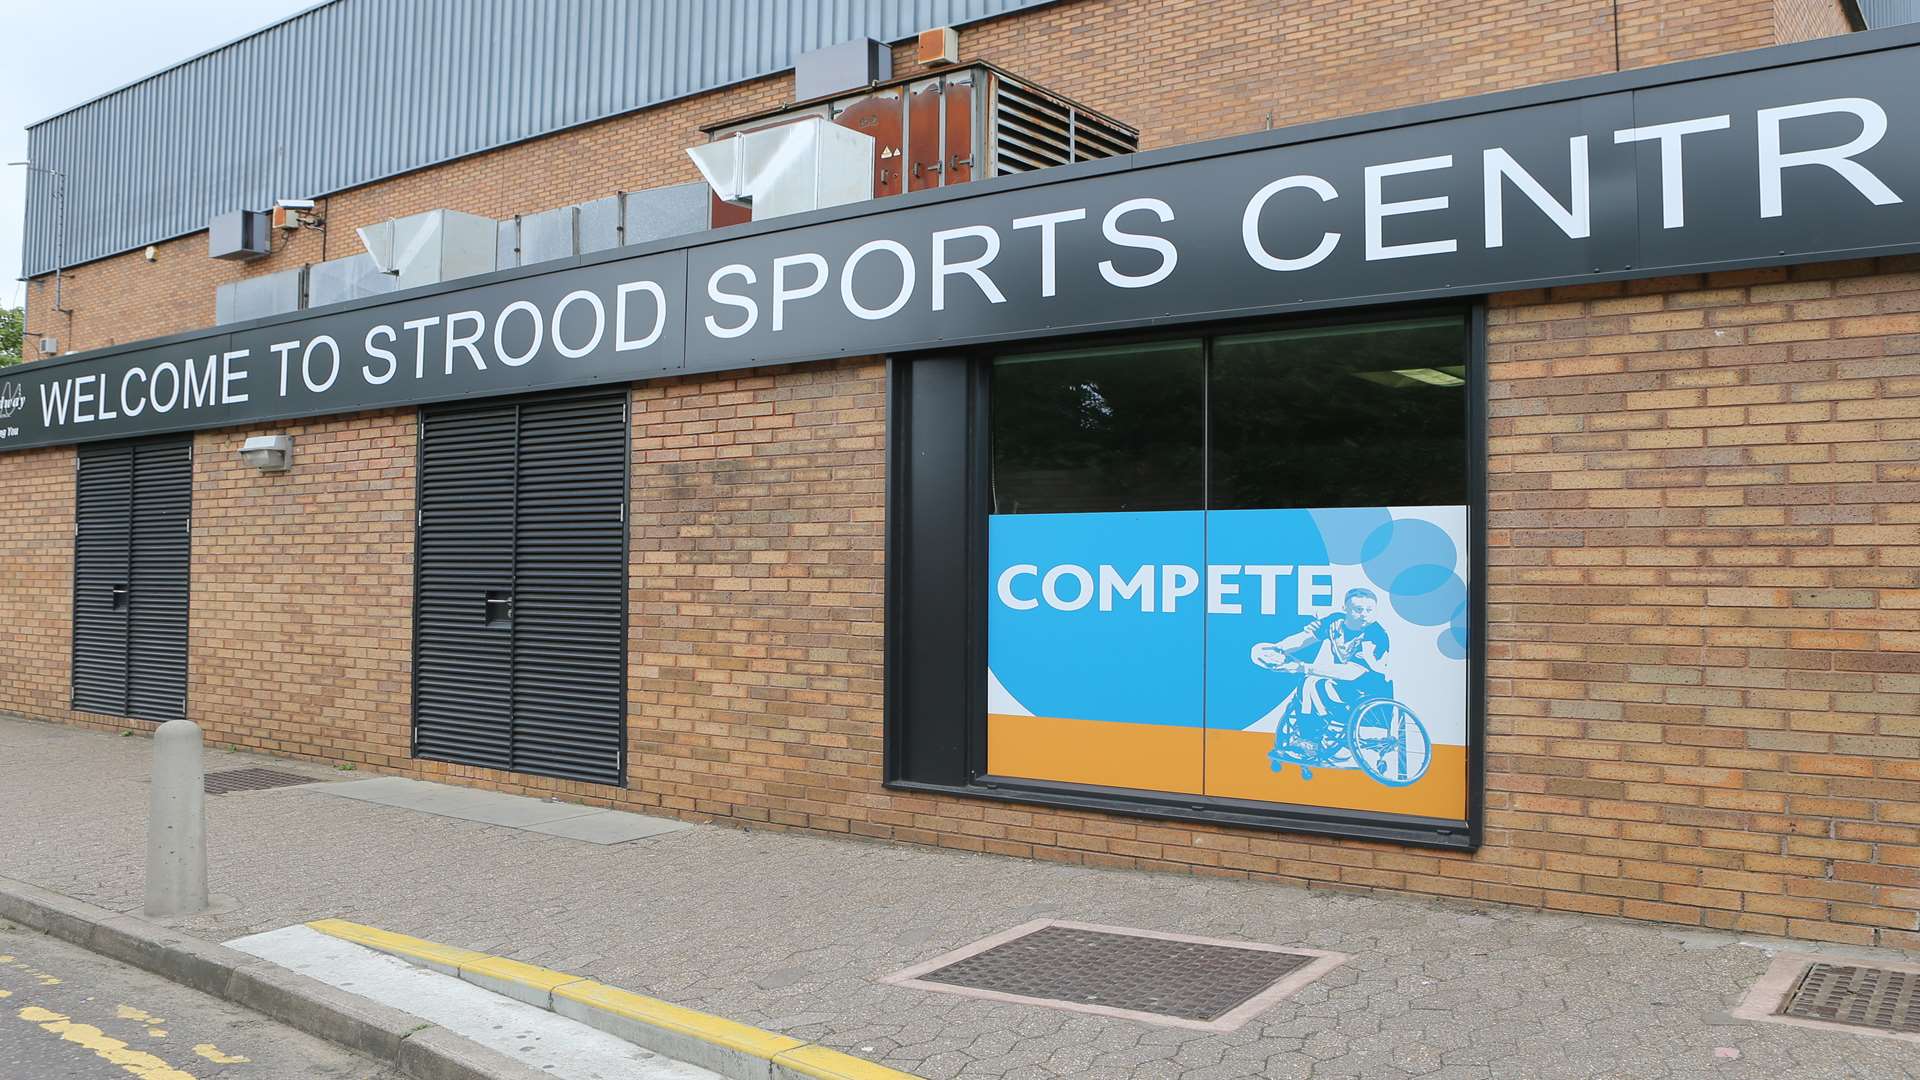 Strood sports centre